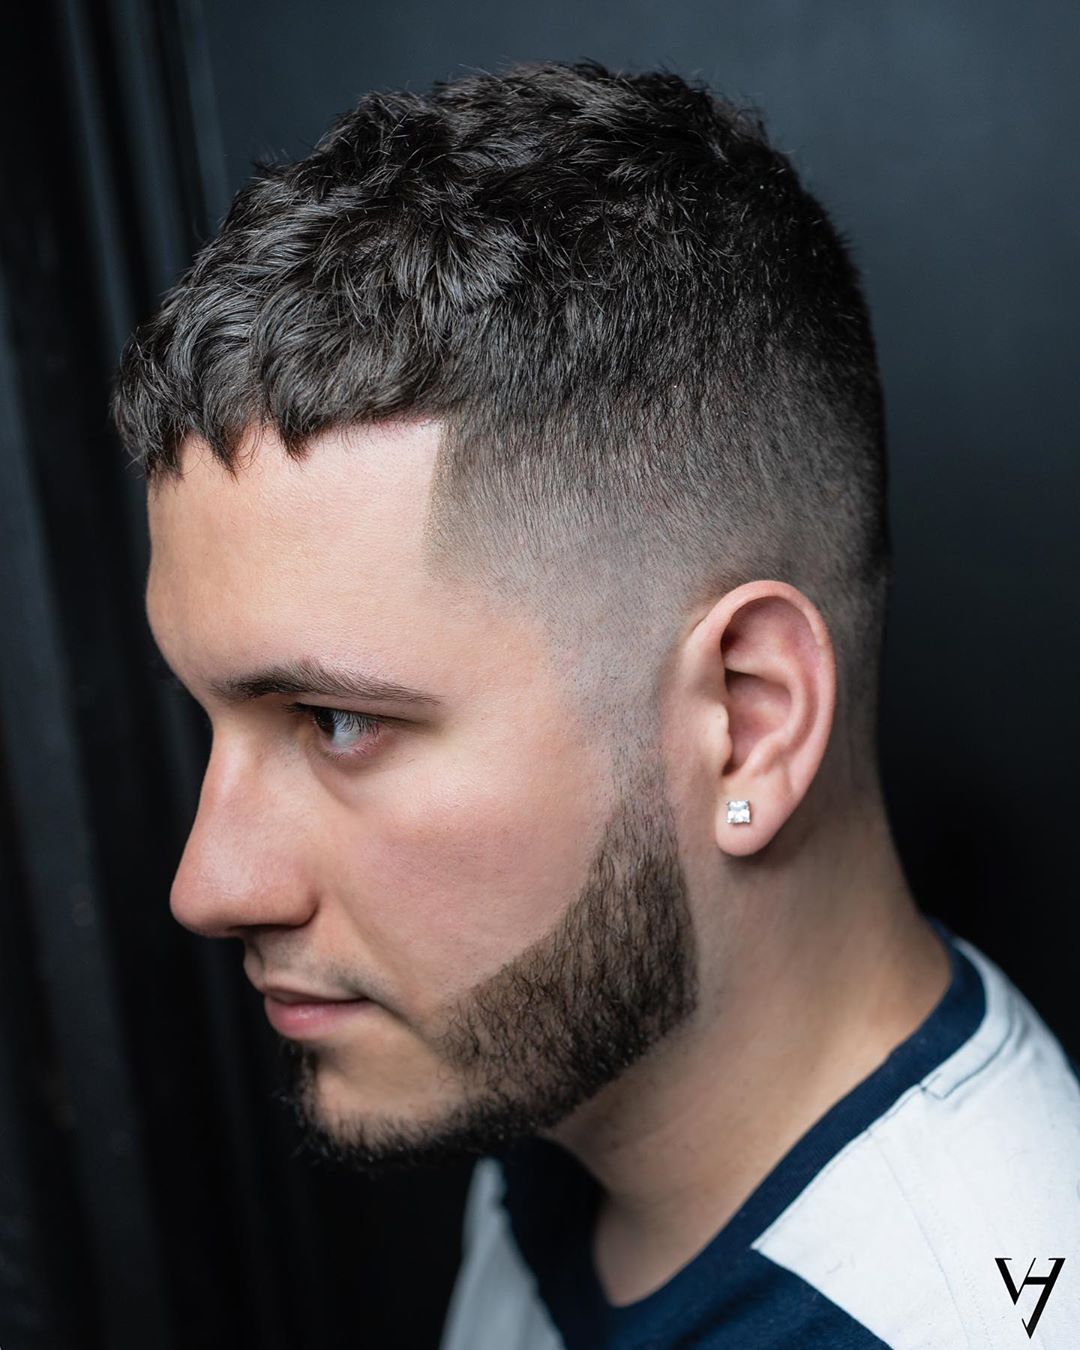 Short Curly Crop Haircut For Men V.hugostyles 